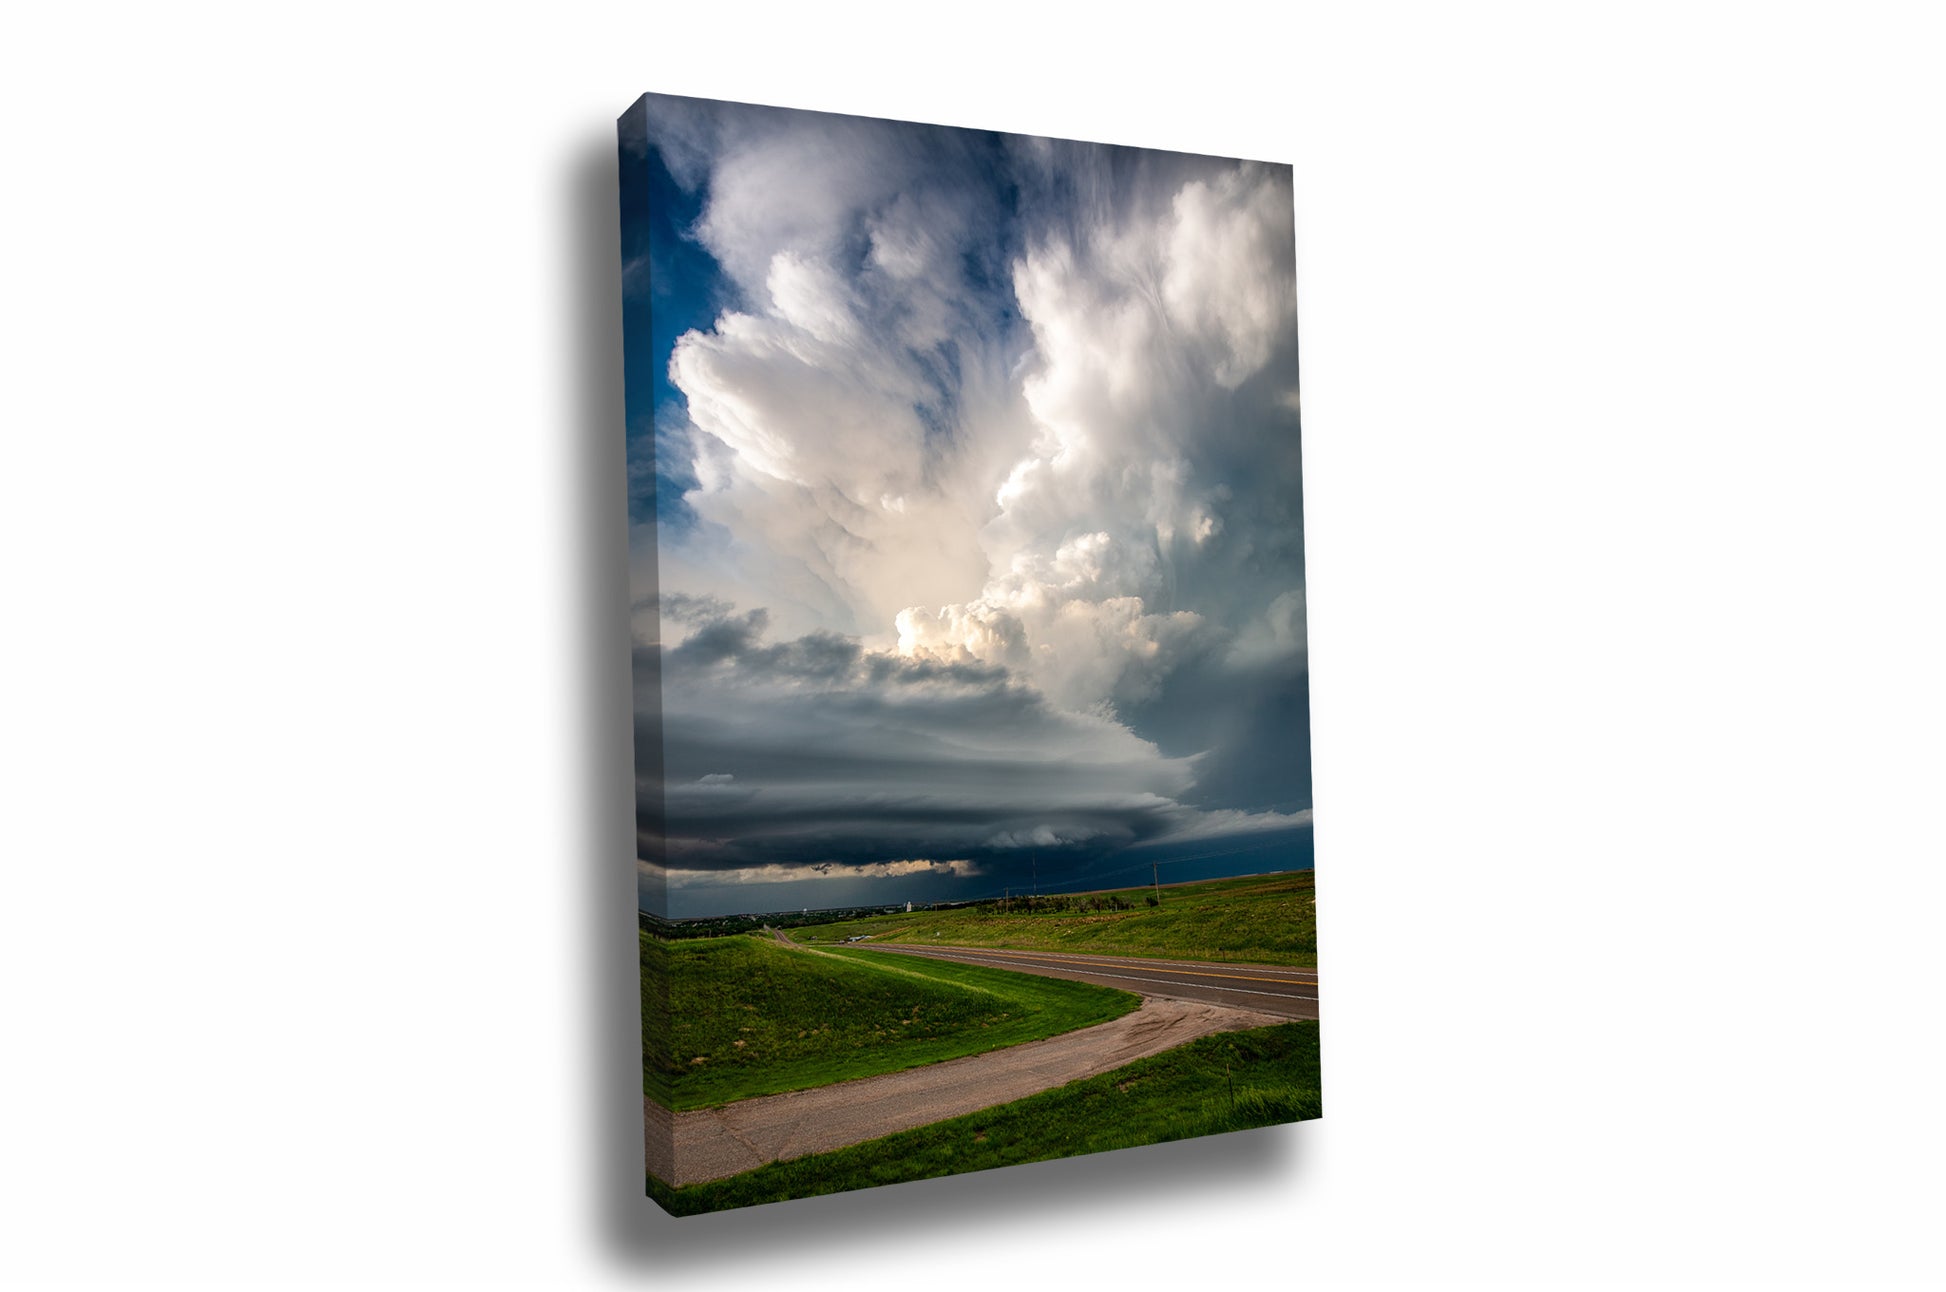 Vertical canvas wall art of a supercell thunderstorm updraft over a highway on a spring day in Kansas by Sean Ramsey of Southern Plains Photography.